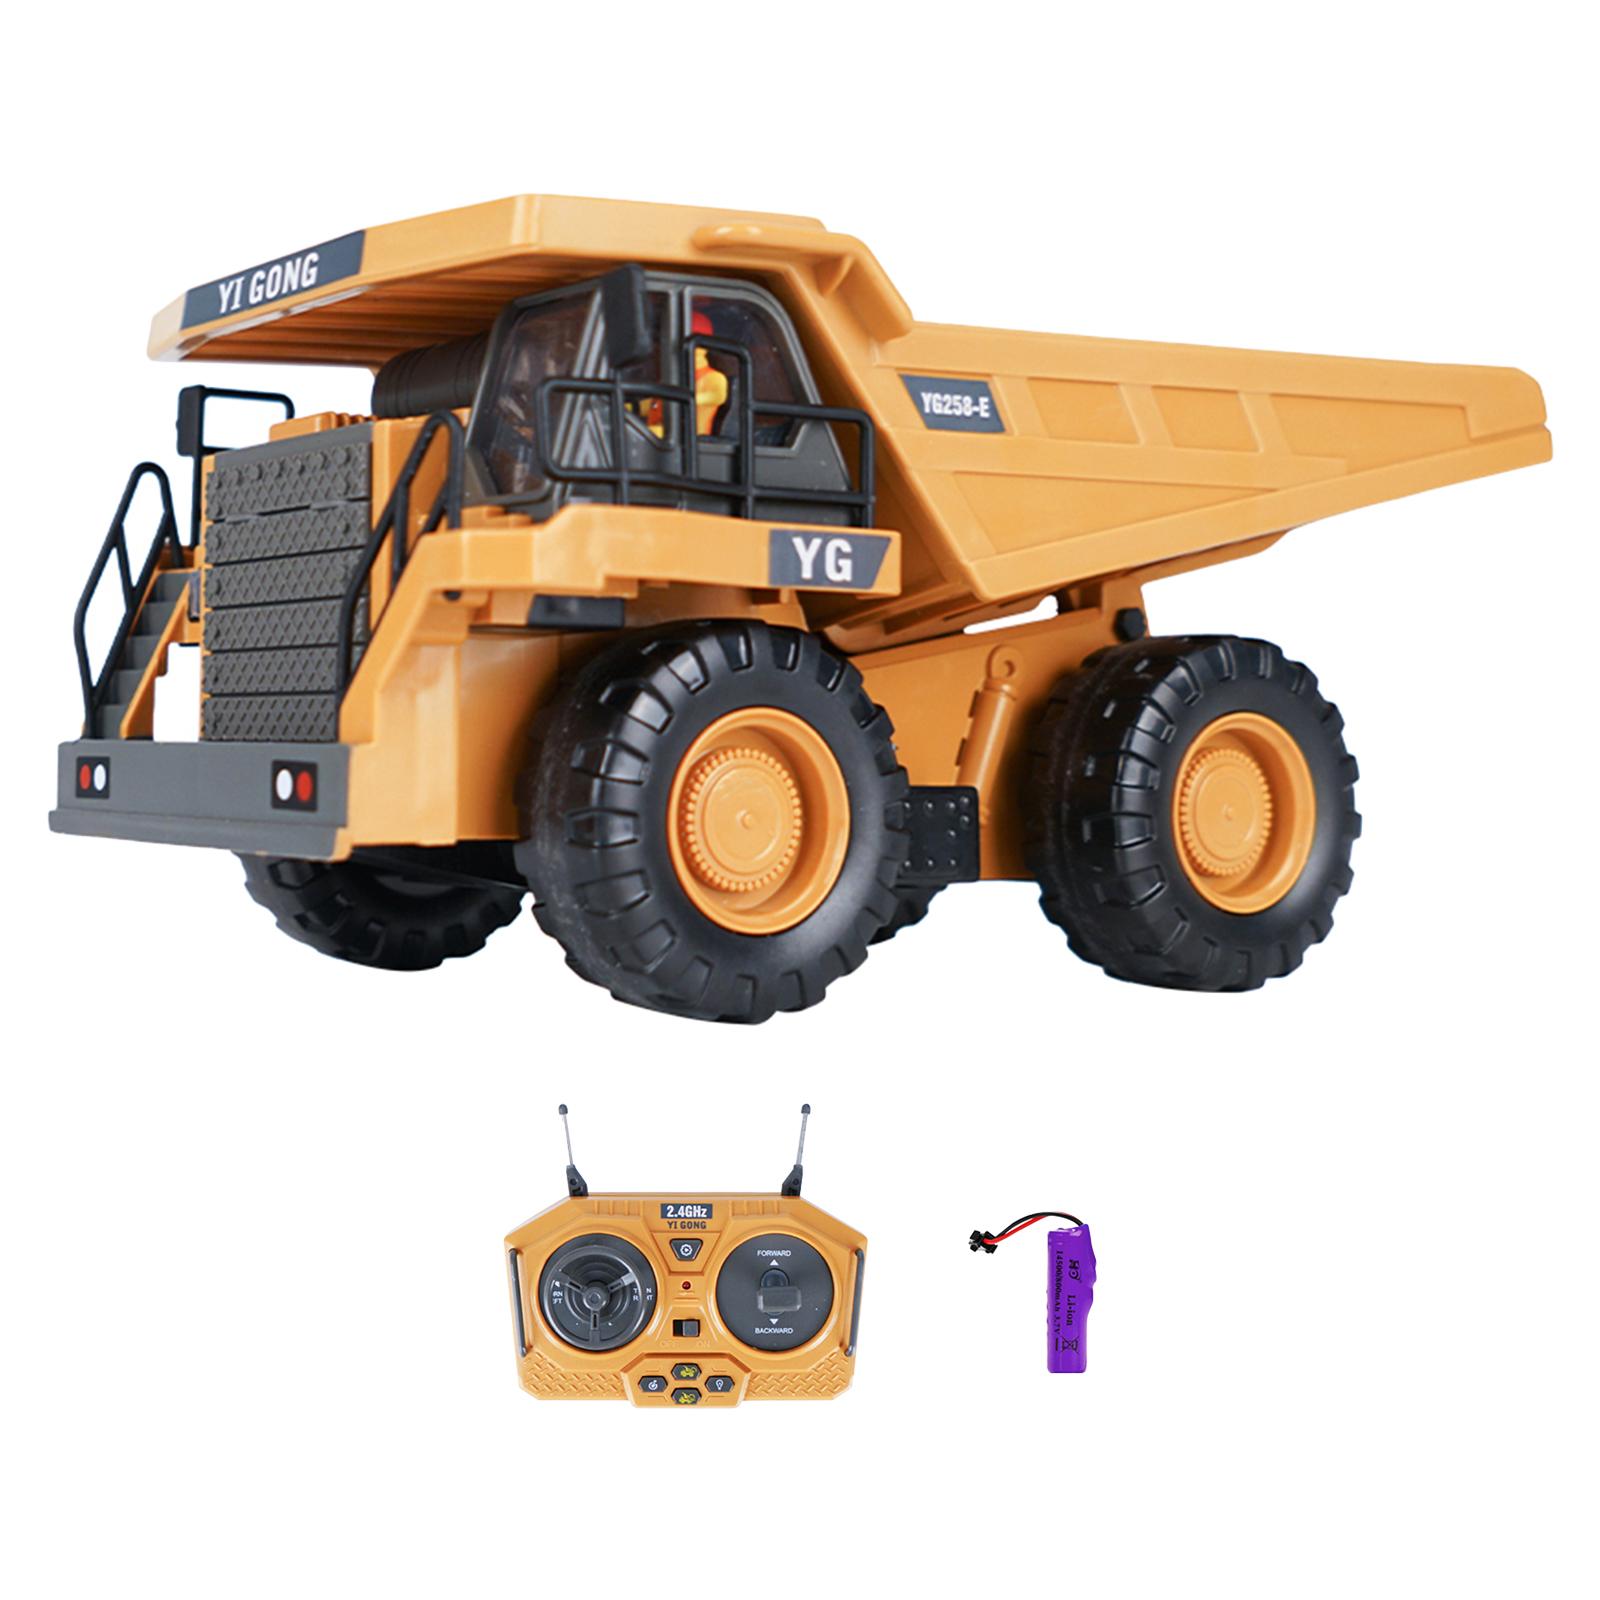 Toy Storing RC Dump Truck 1/24 9CH Dumper Technique Vehicle 2.4G Radio Controlled Cars